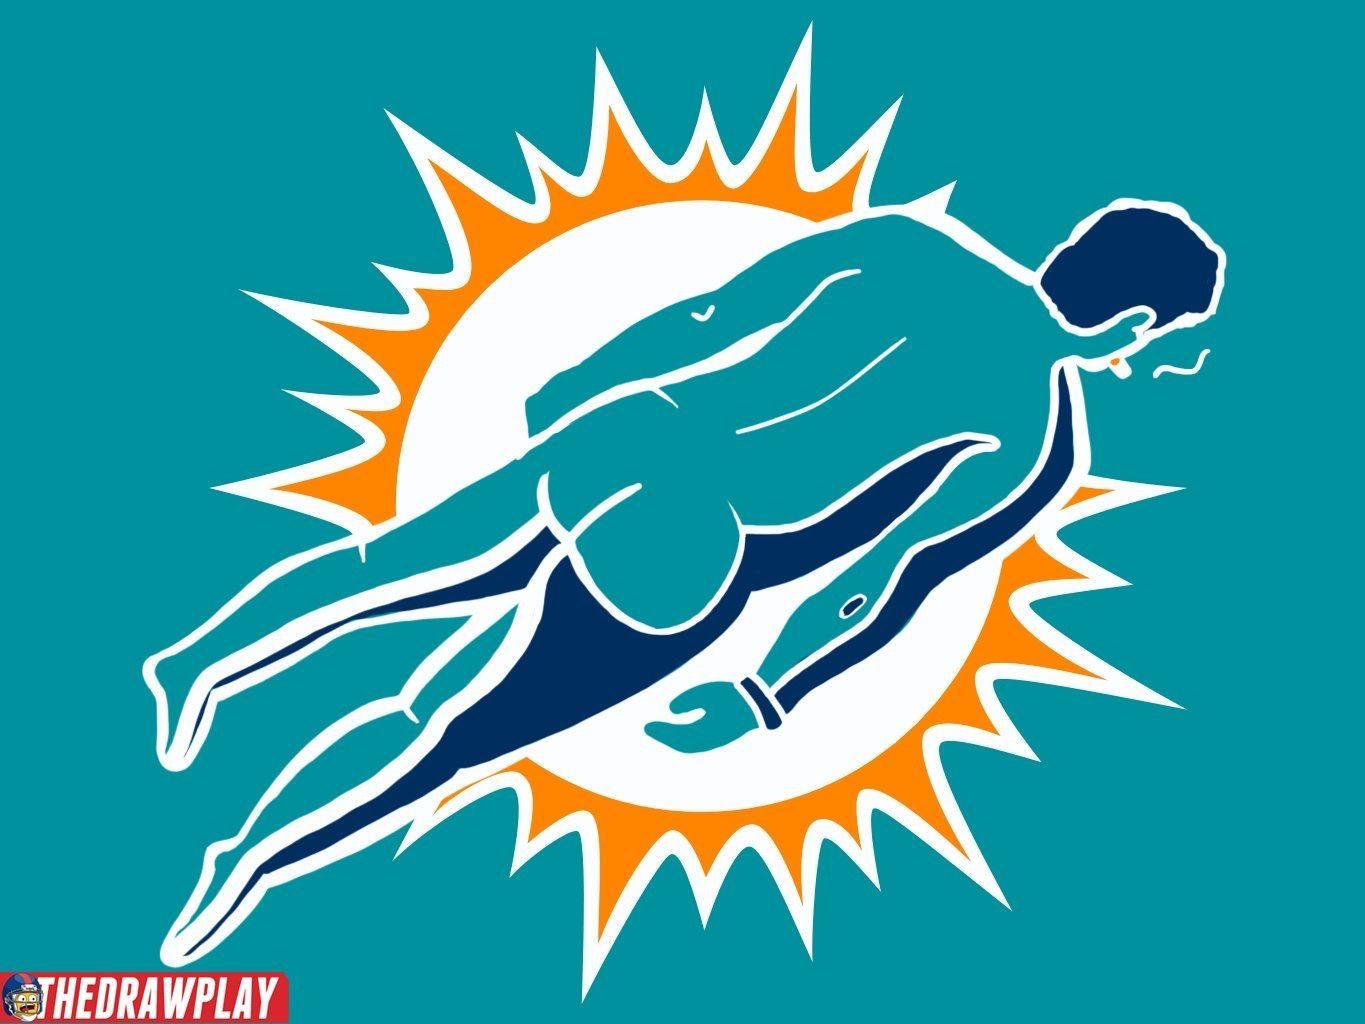 New Dolphins Logo - Love the new Dolphins logo